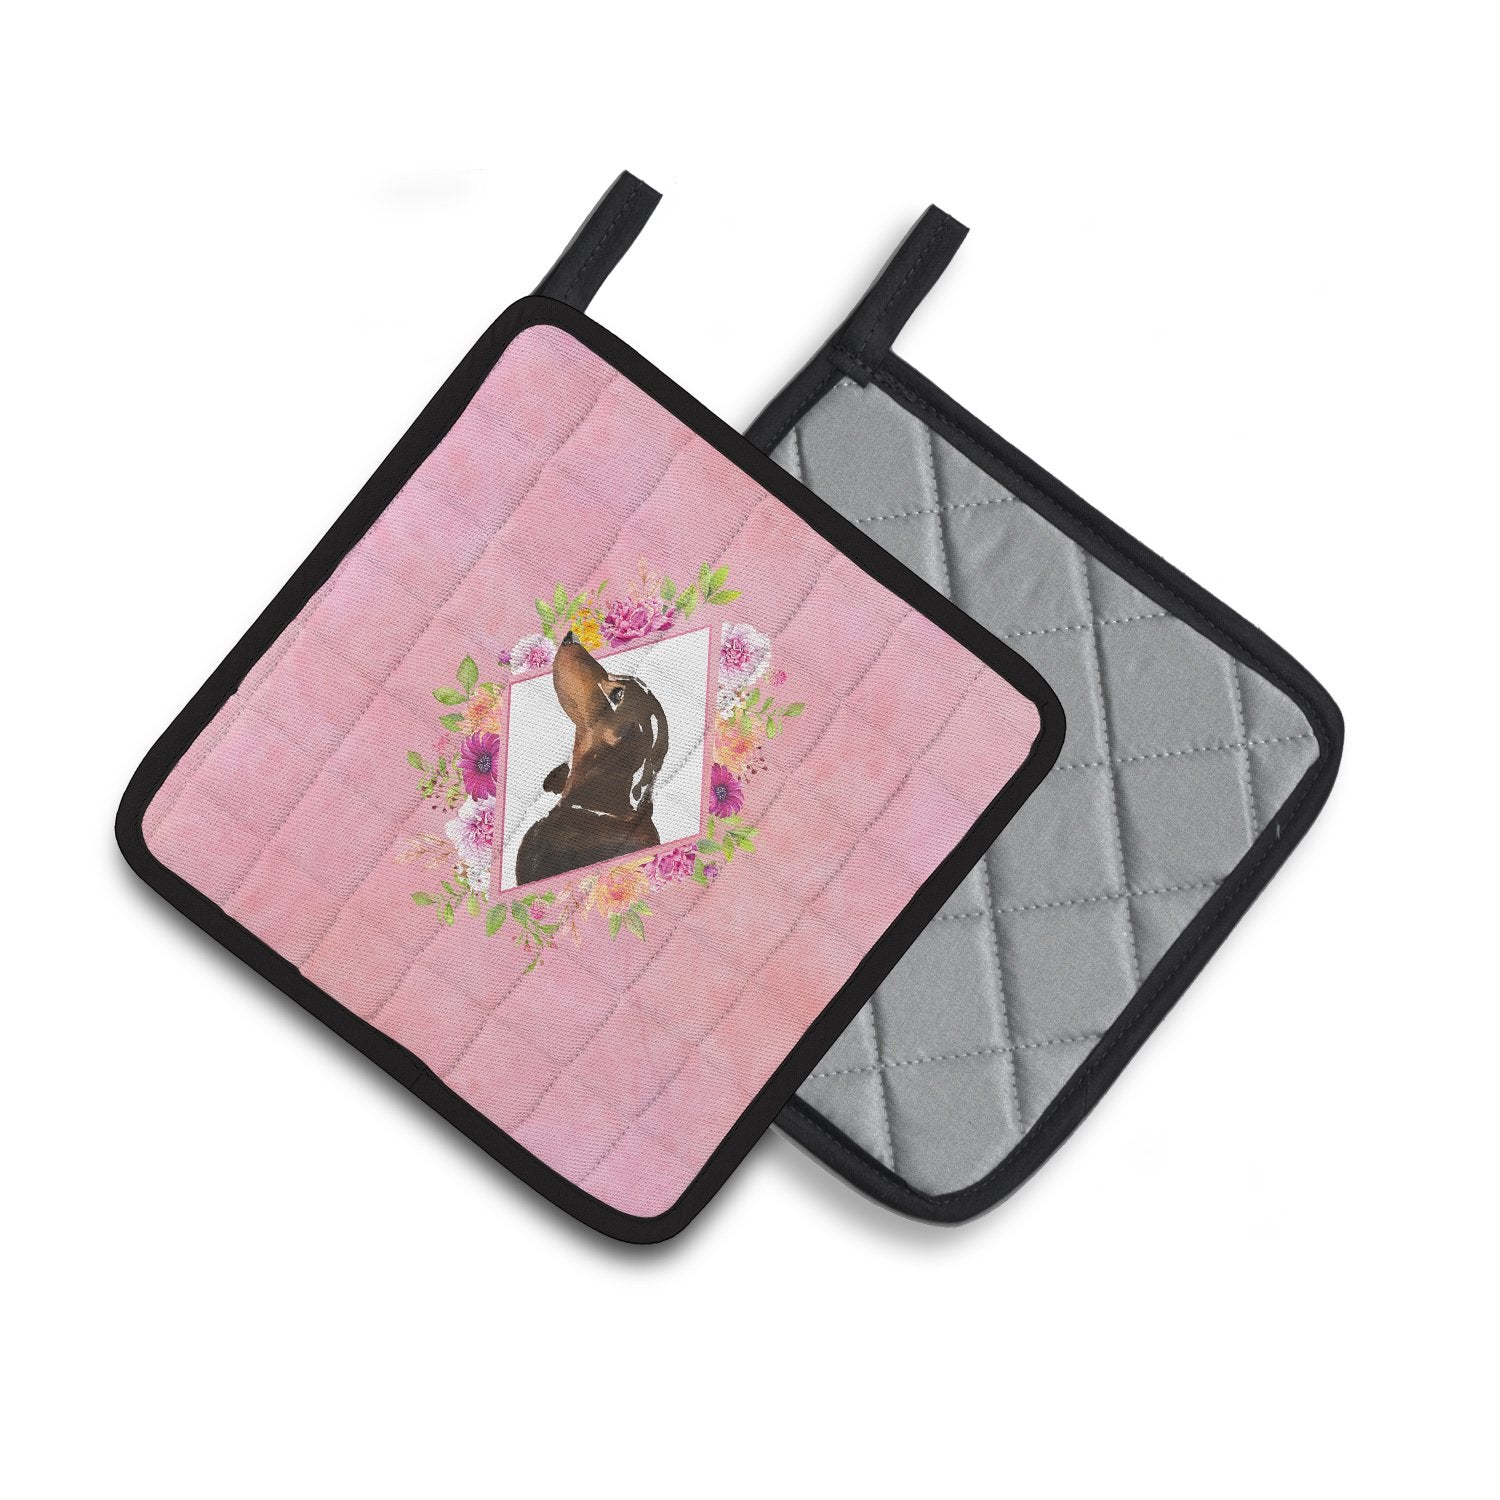 Black and Tan Dachshund Pink Flowers Pair of Pot Holders CK4262PTHD by Caroline's Treasures